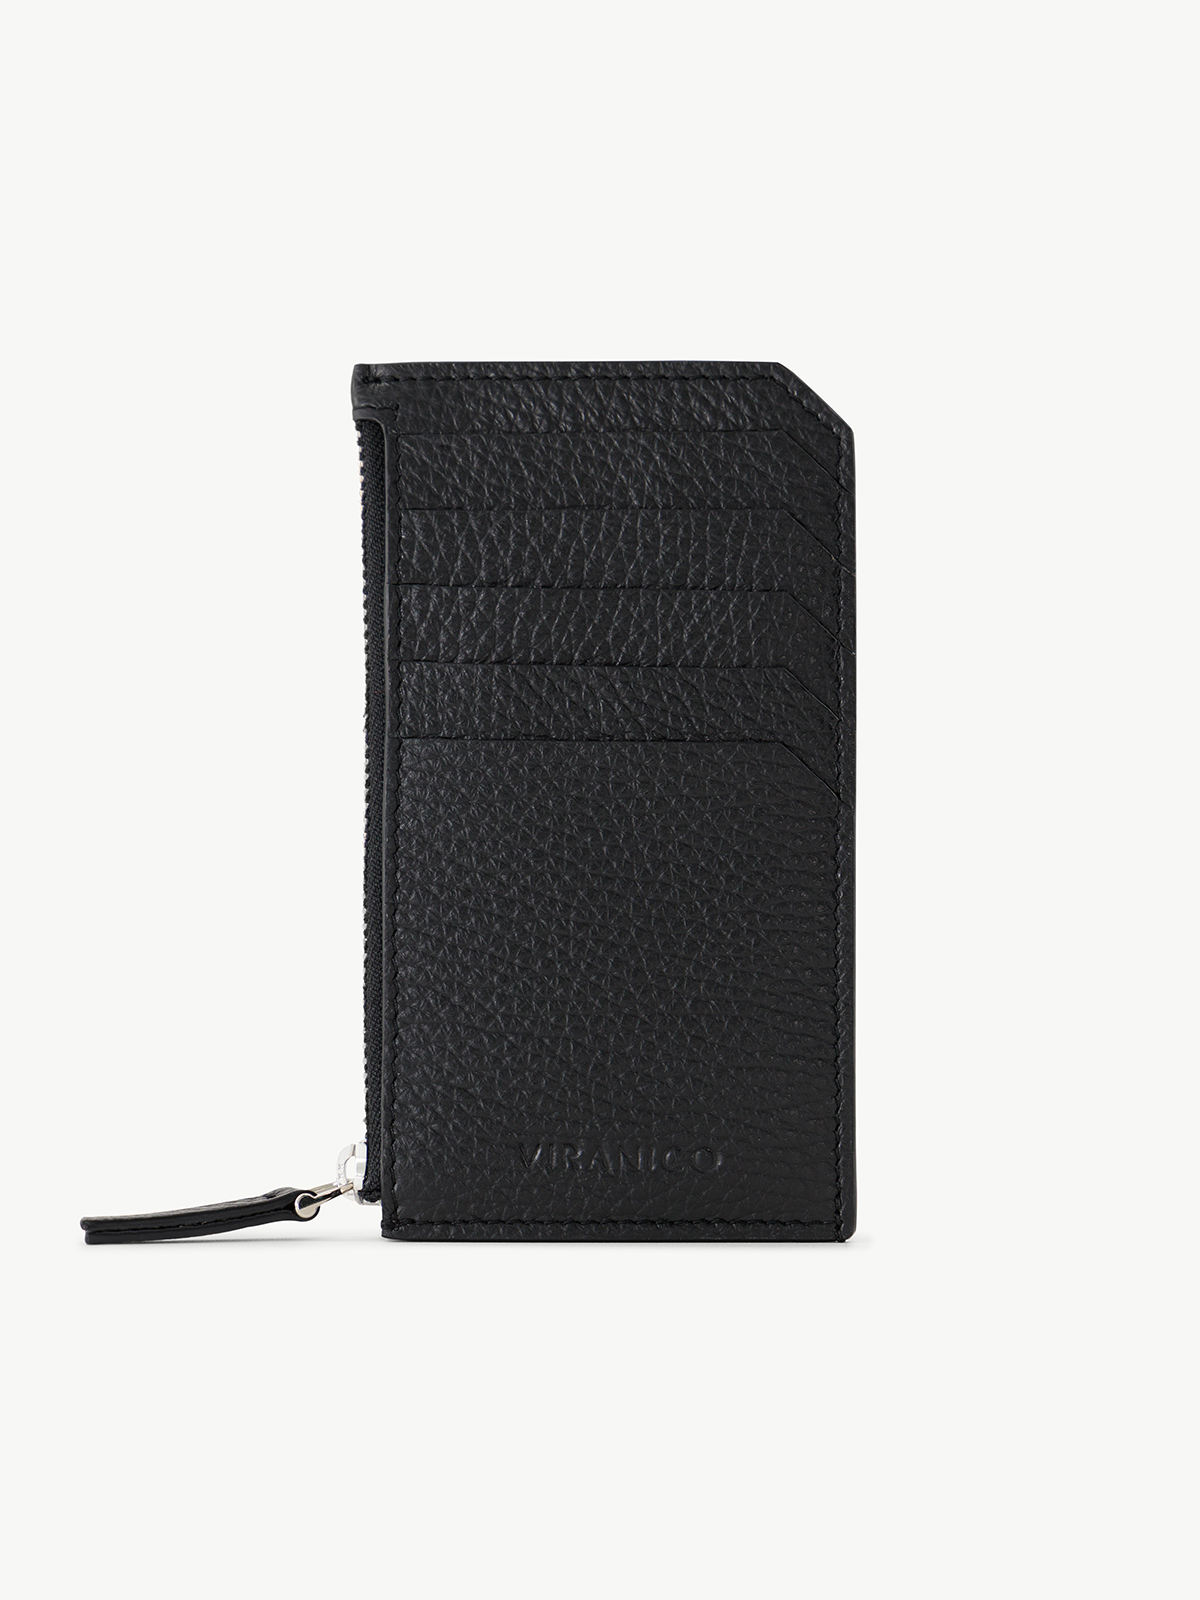 card holder with zipper